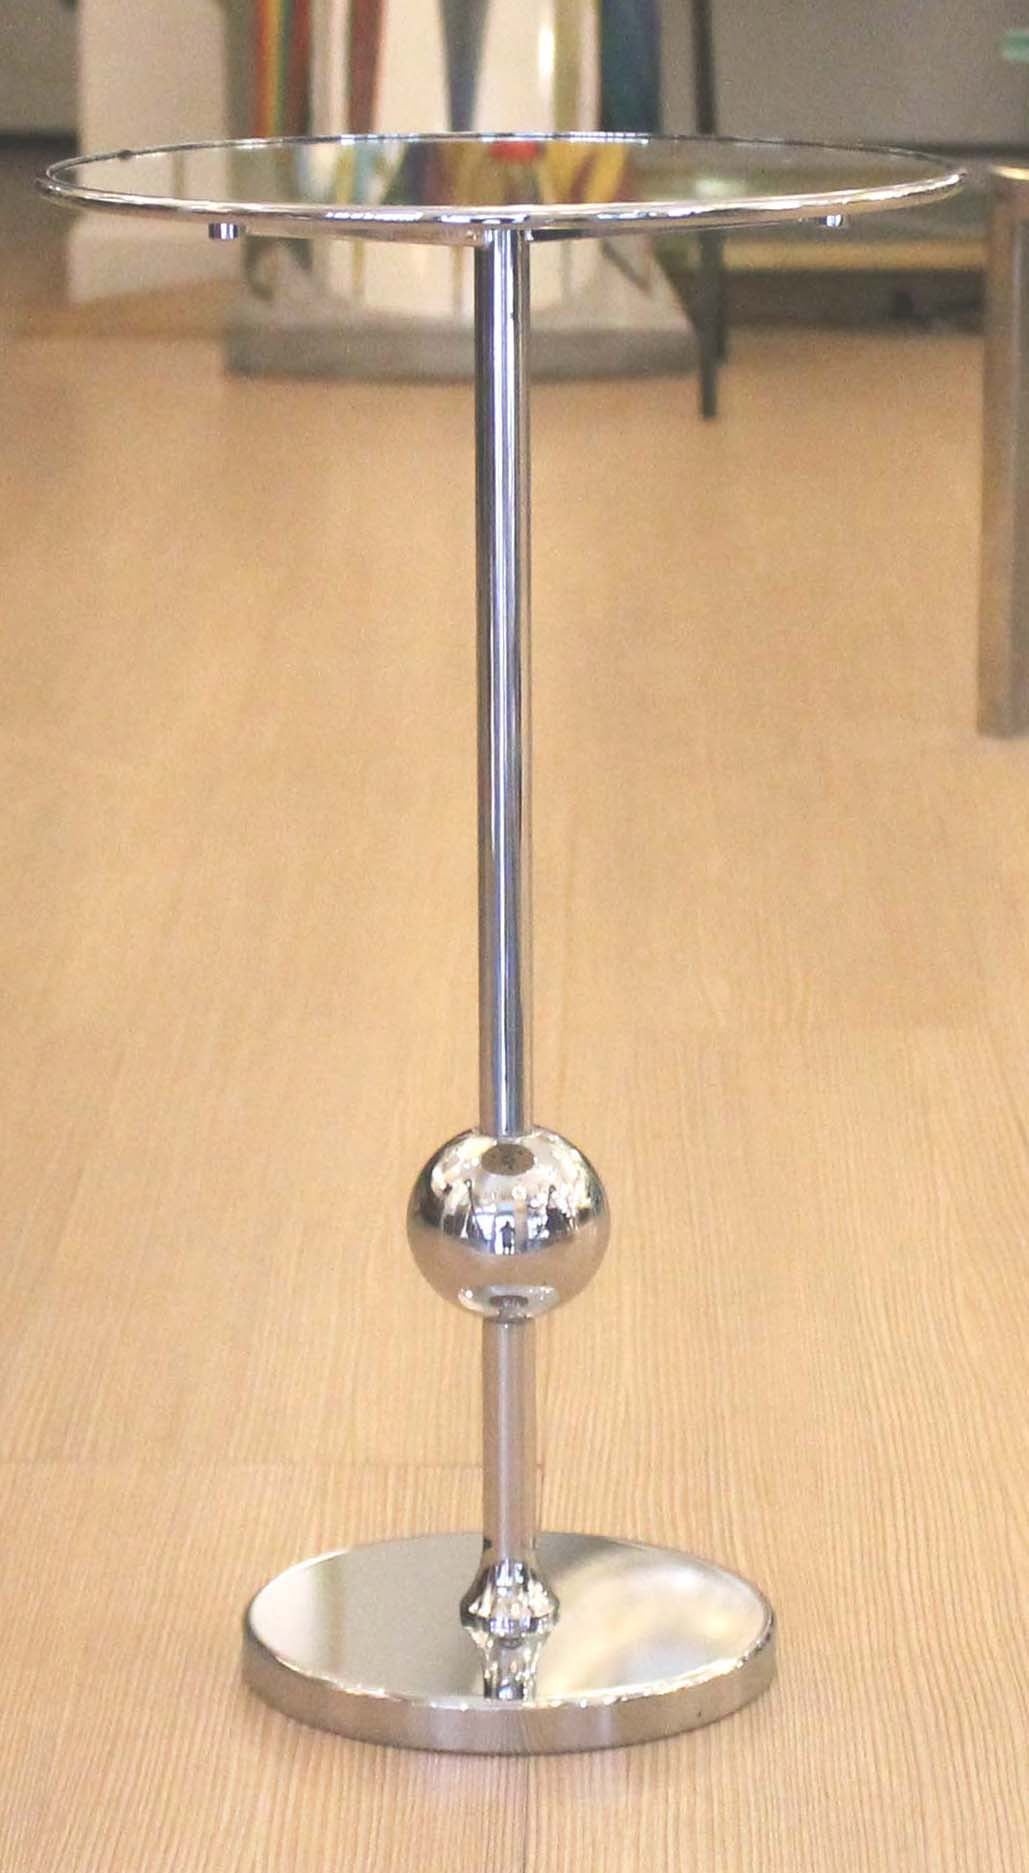 Diminutive nickel plated side table. The top is a silvered mirror. The stem connecting the base to the top has a sphere in the lower part. Small tables with a sphere are commonly attributed to Osvaldo Borsani one of the most important Italian